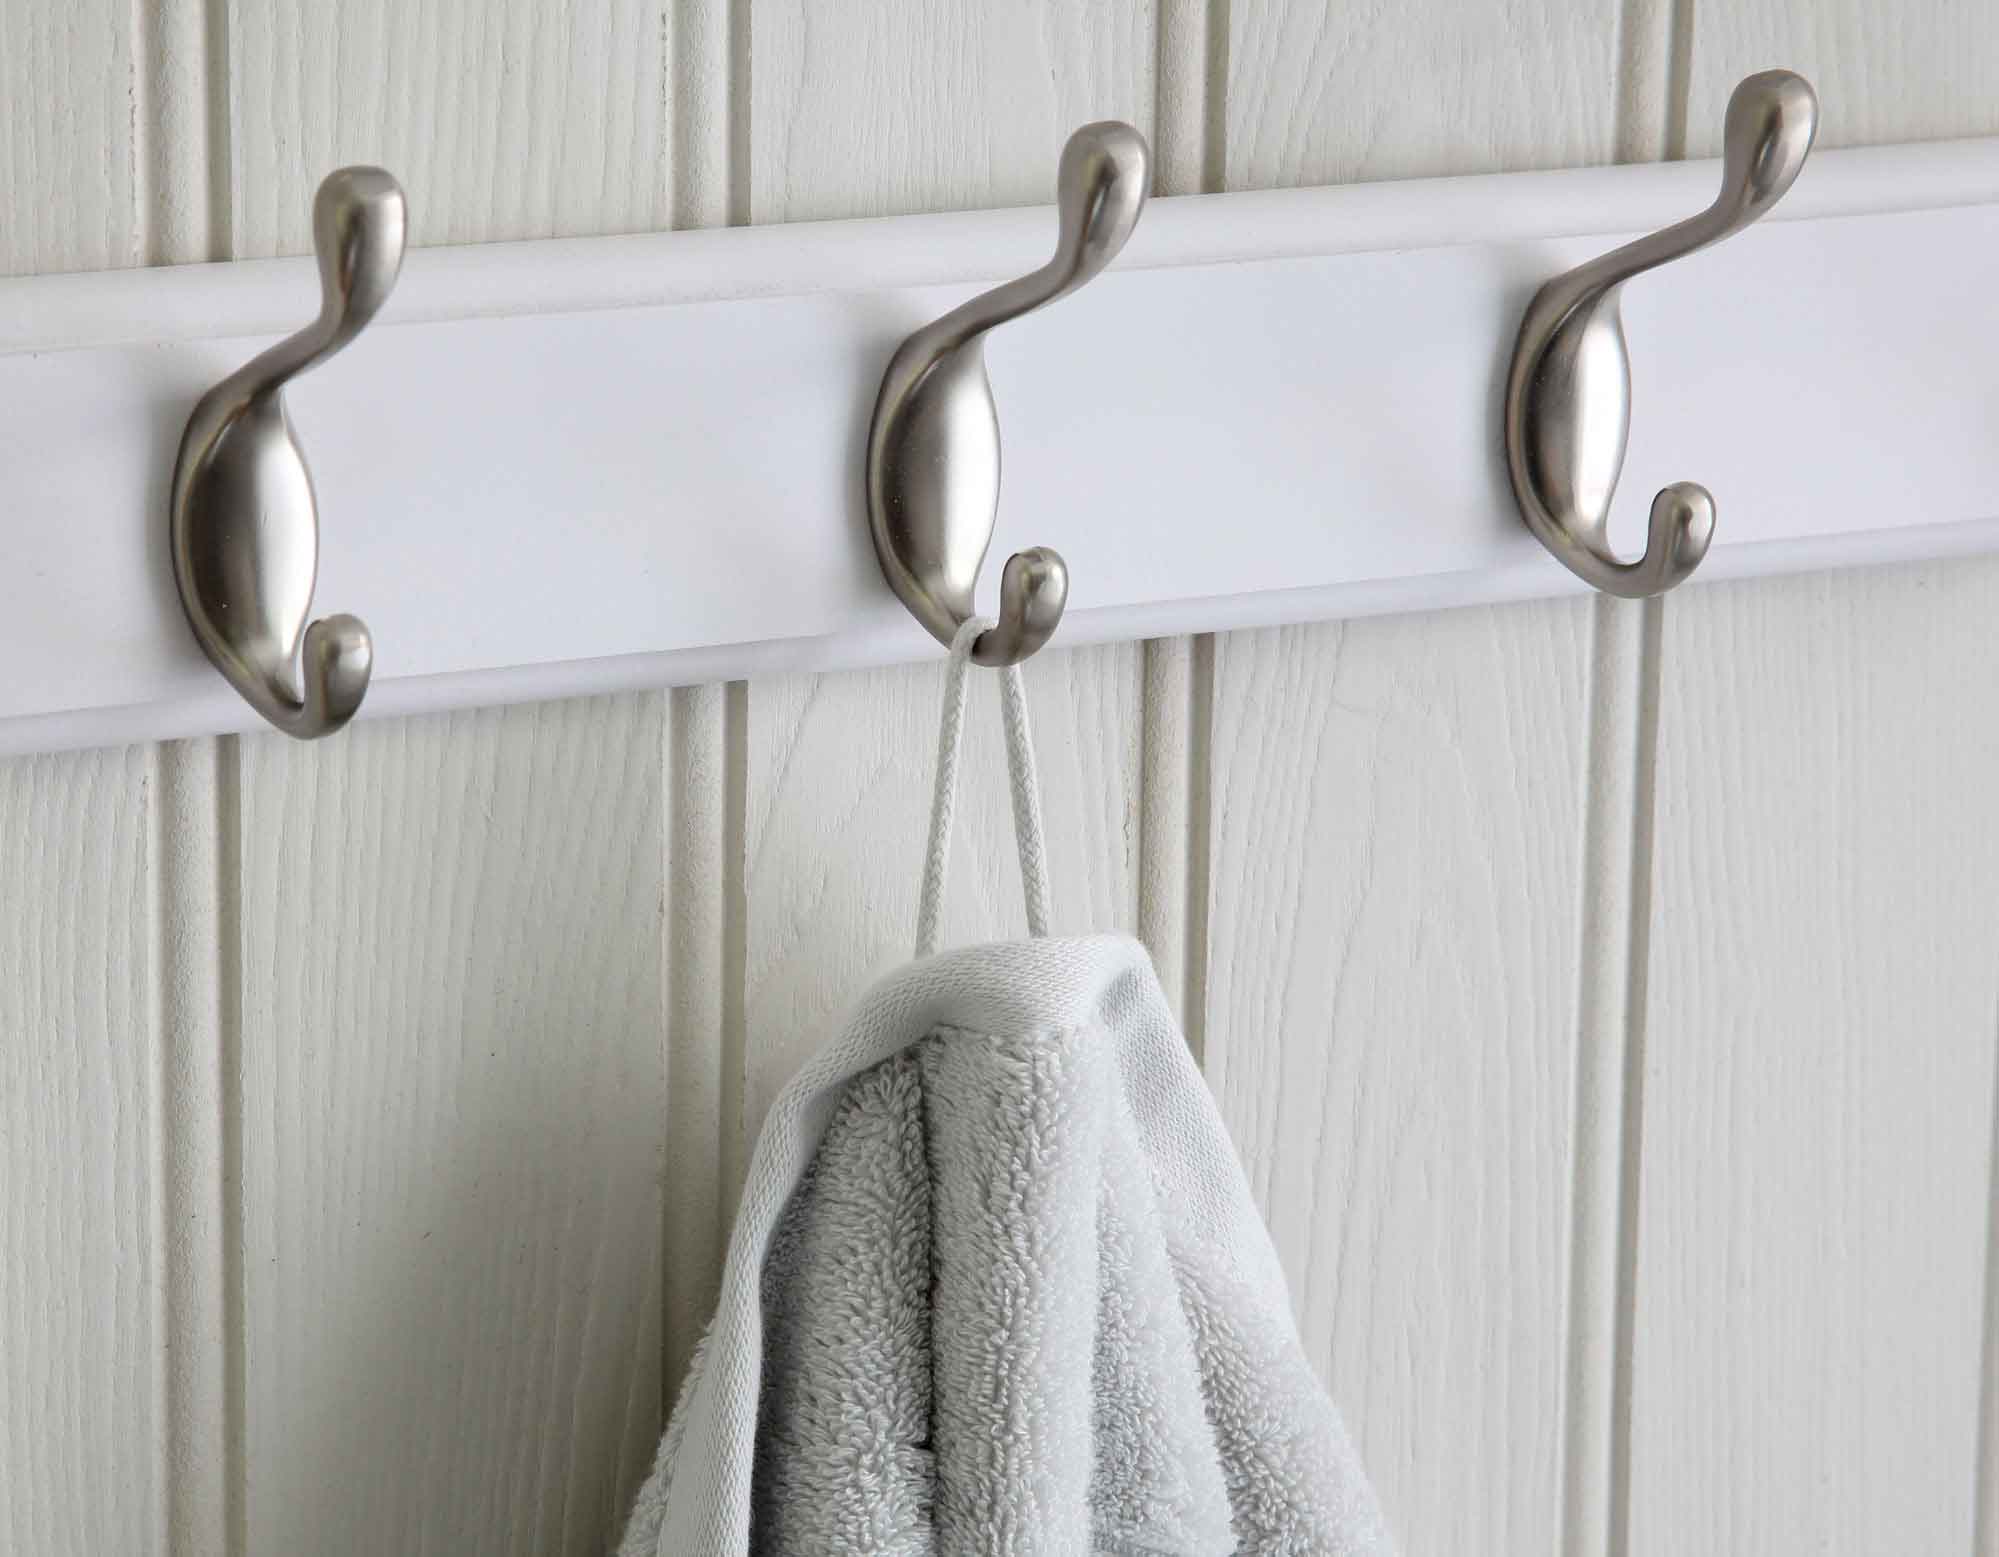 Egyptian cotton bath towel in grey hanging from wall hook